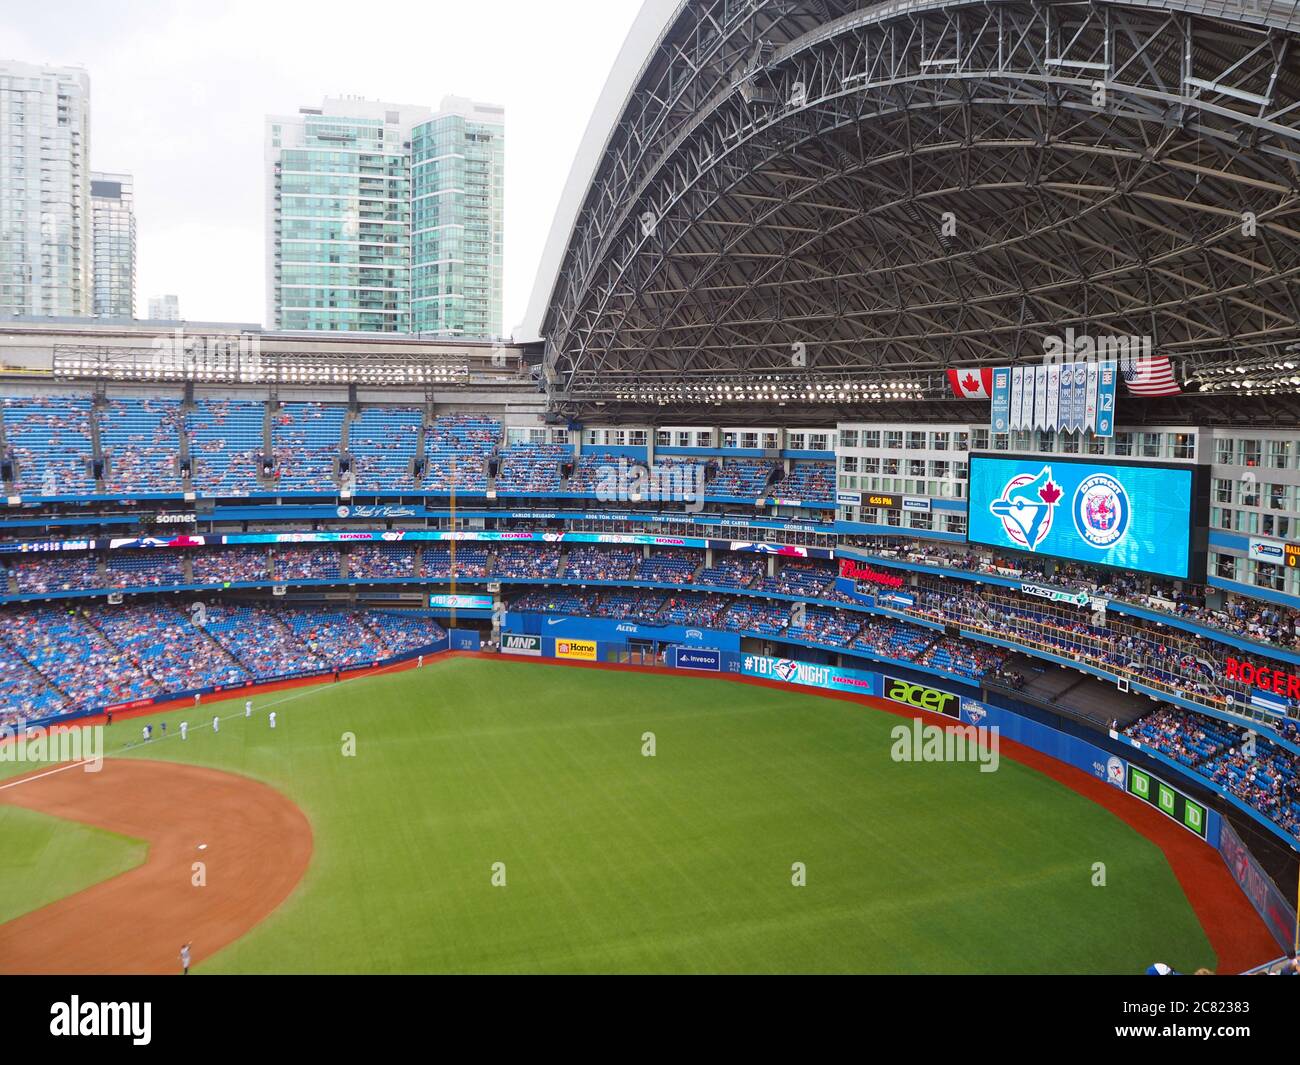 Toronto Blue Jays baseball team playing against the Detroit Tigers at Rogers Centre, Toronto, Ontario, Canada Stock Photo